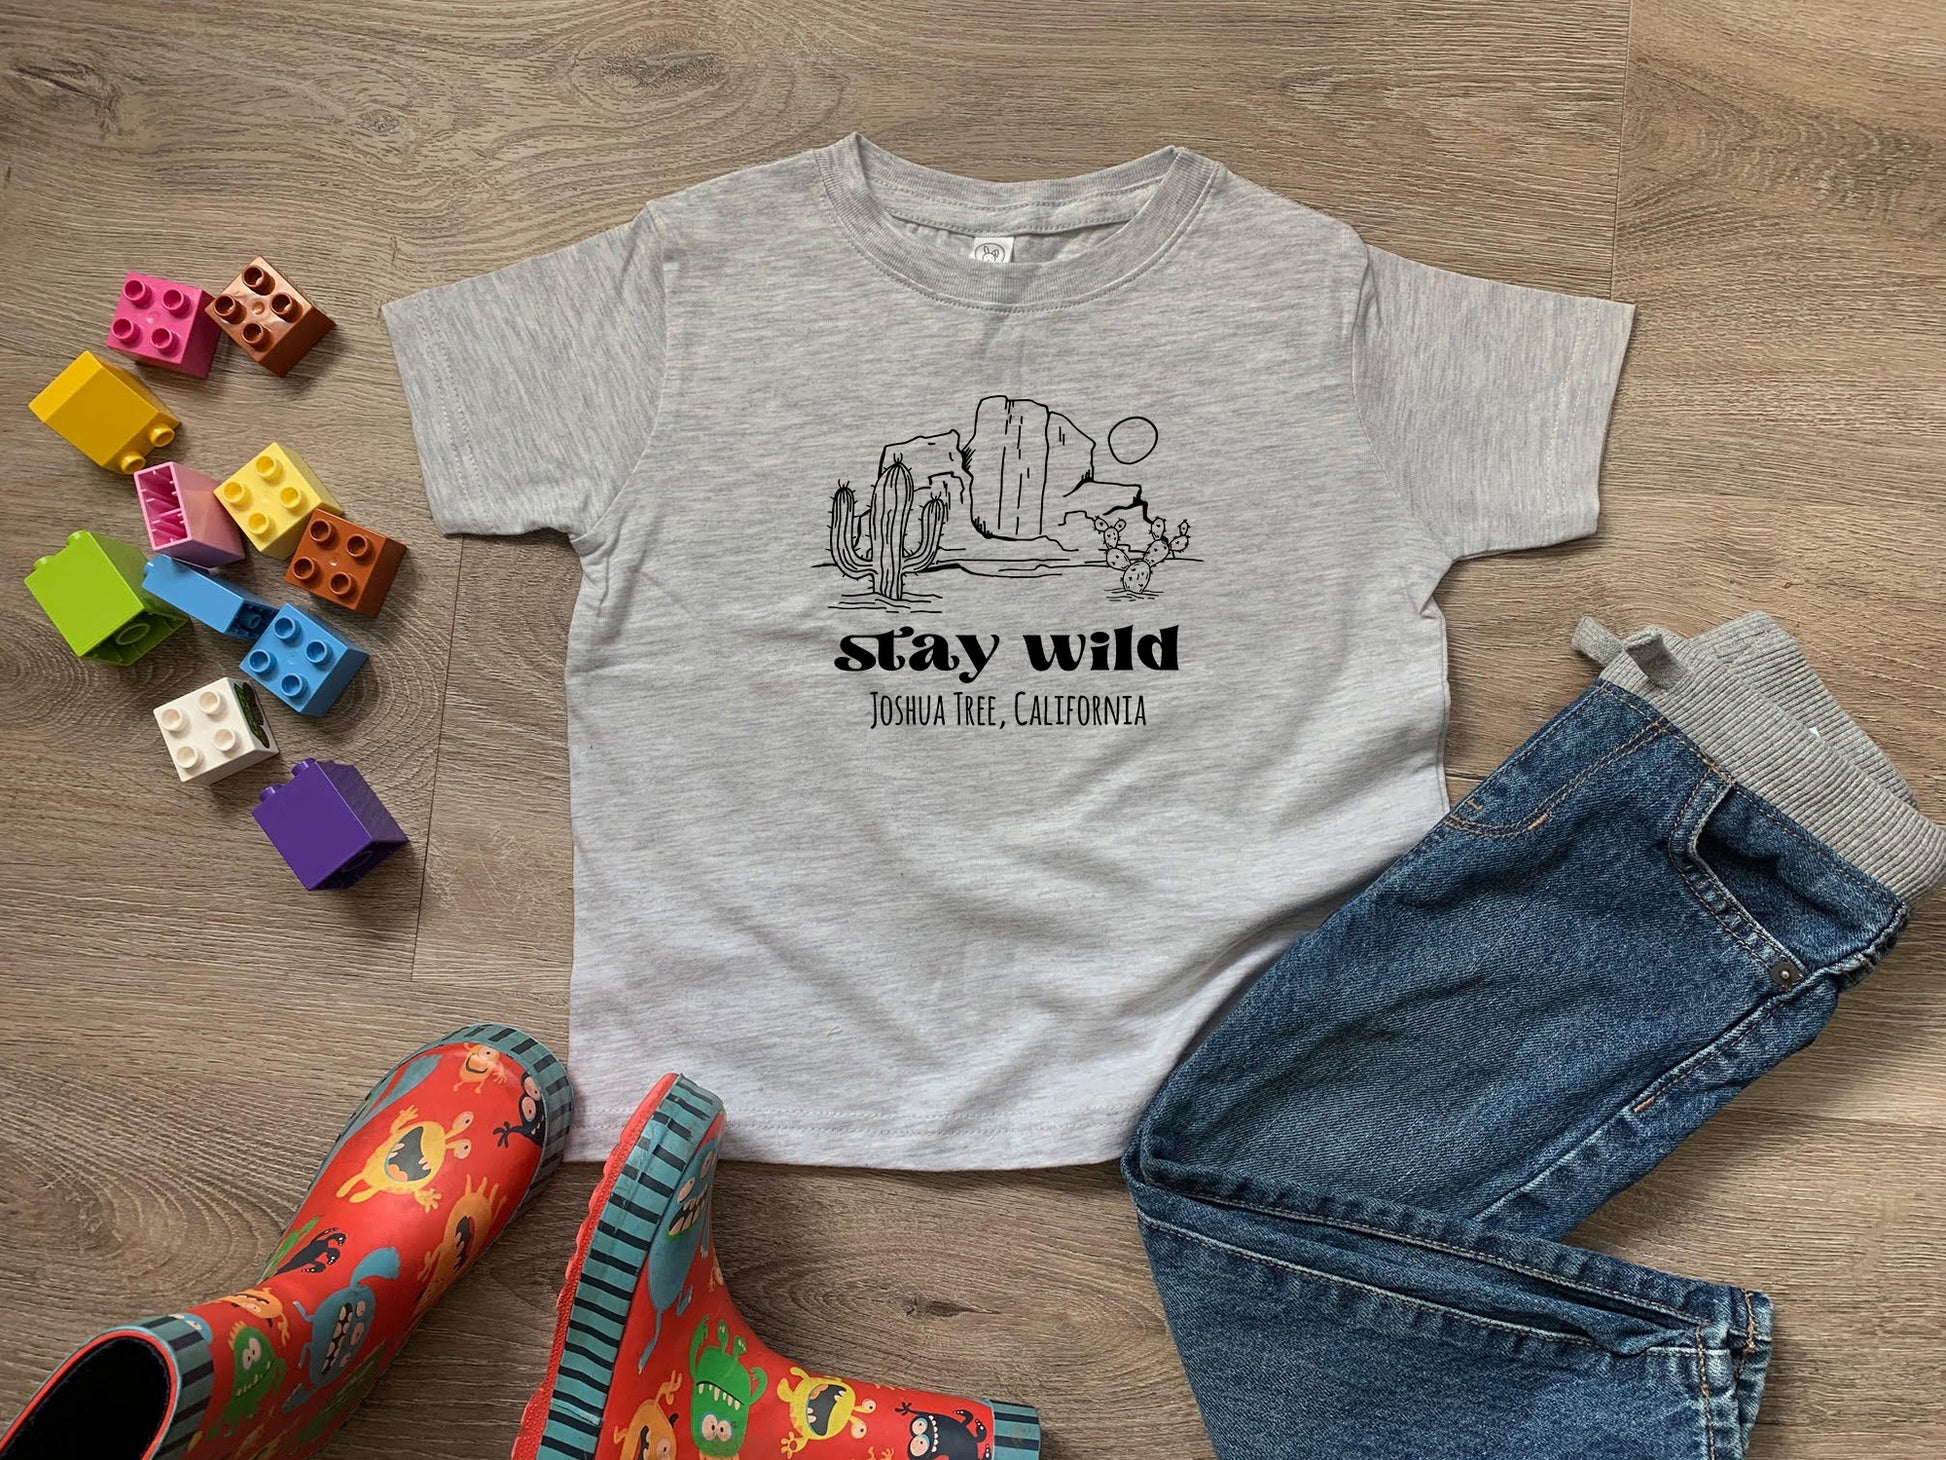 a t - shirt that says stay wild and a pair of jeans